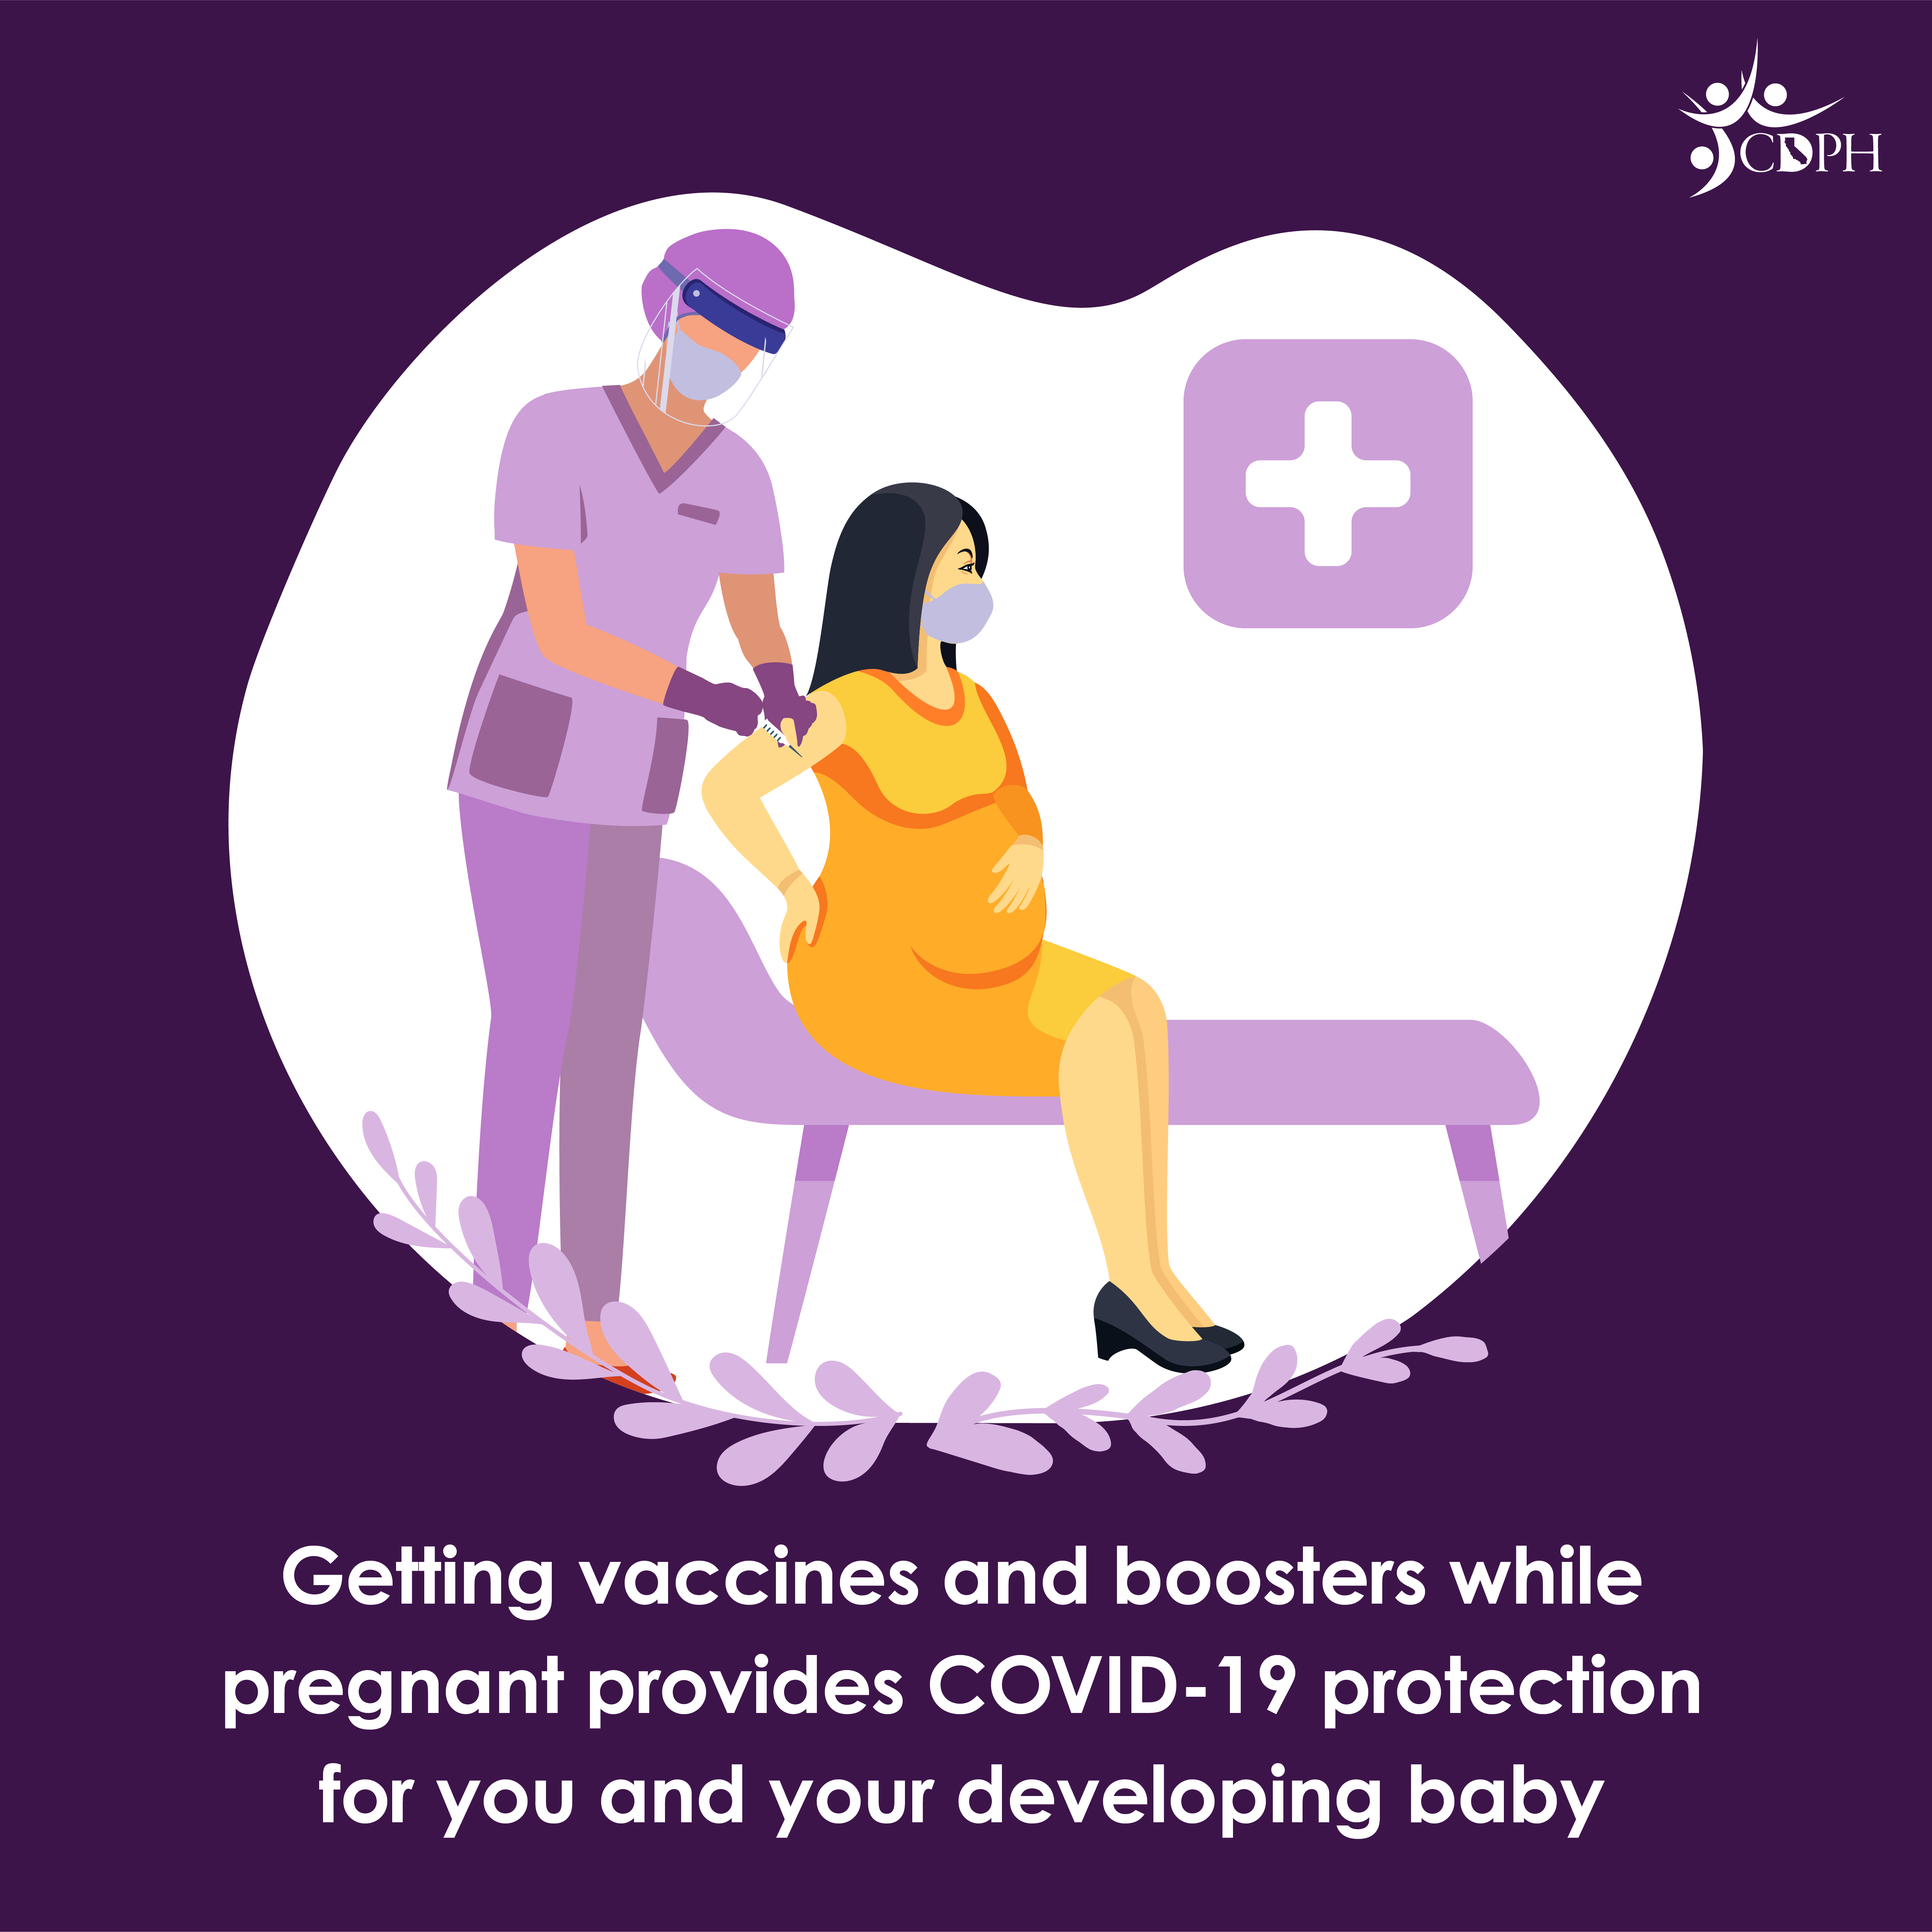 Getting vaccines and boosters while pregnant provides COVID-19 protection for you and your developing baby